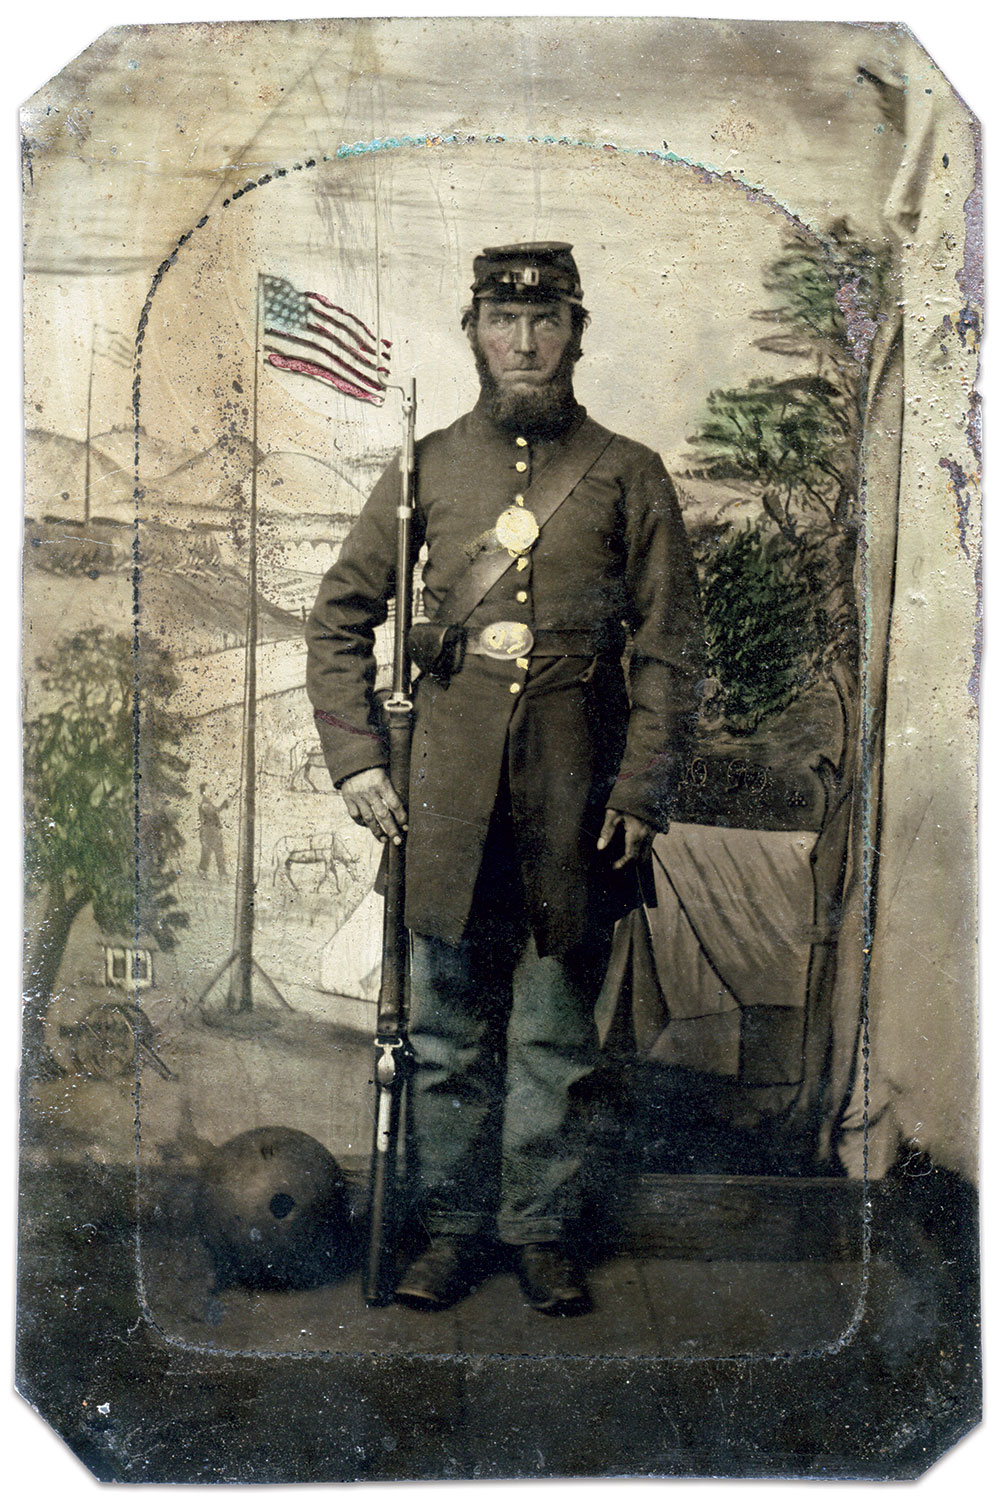 Published in the Winter 2019 issue of MI with the partial identification “Samuel Bo—,” owner Michele Behan consulted with John Richter of the Center for Civil War Photography and other sources to identify him as Samuel Boehler (Behler) of the 2nd Pennsylvania Heavy Artillery. He was killed in action on July 10, 1864, during the Siege of Petersburg. Eighth-plate tintype. Michele Behan Collection.